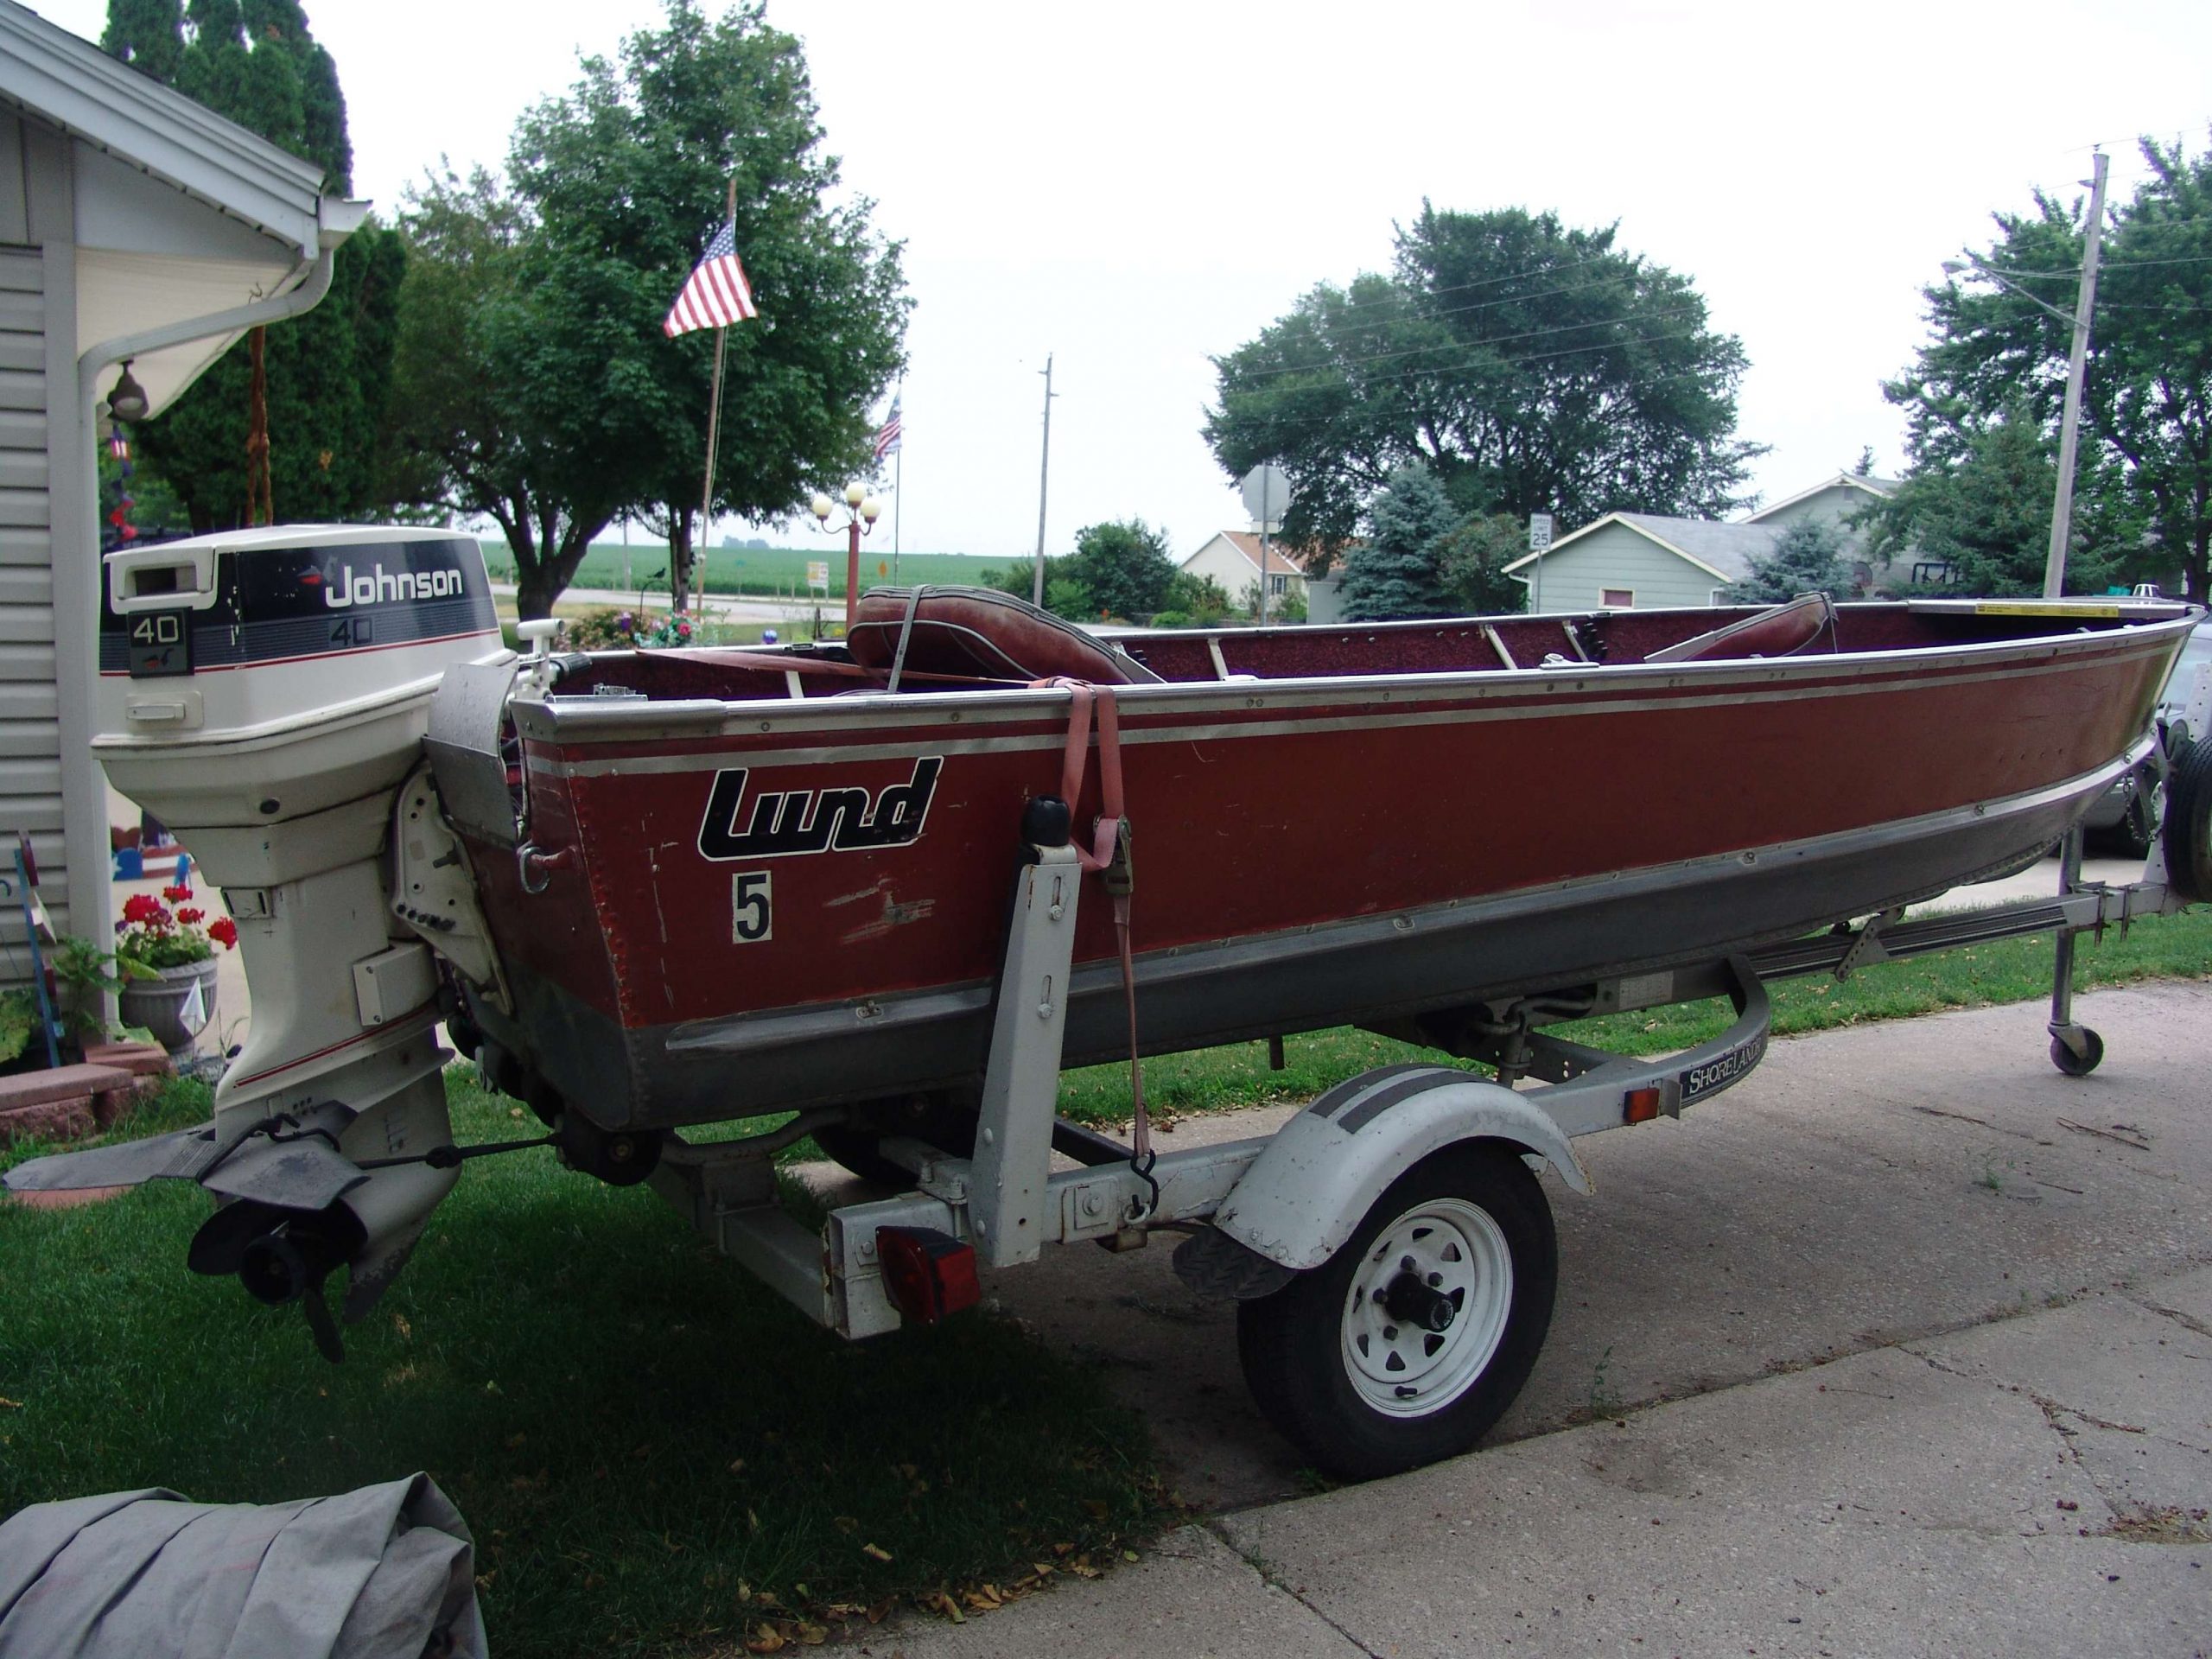 After my first boat was totaled in a car accident, I was able to make a modest upgrade to a 16-foot Lund with 40 hp Johnson on the back.